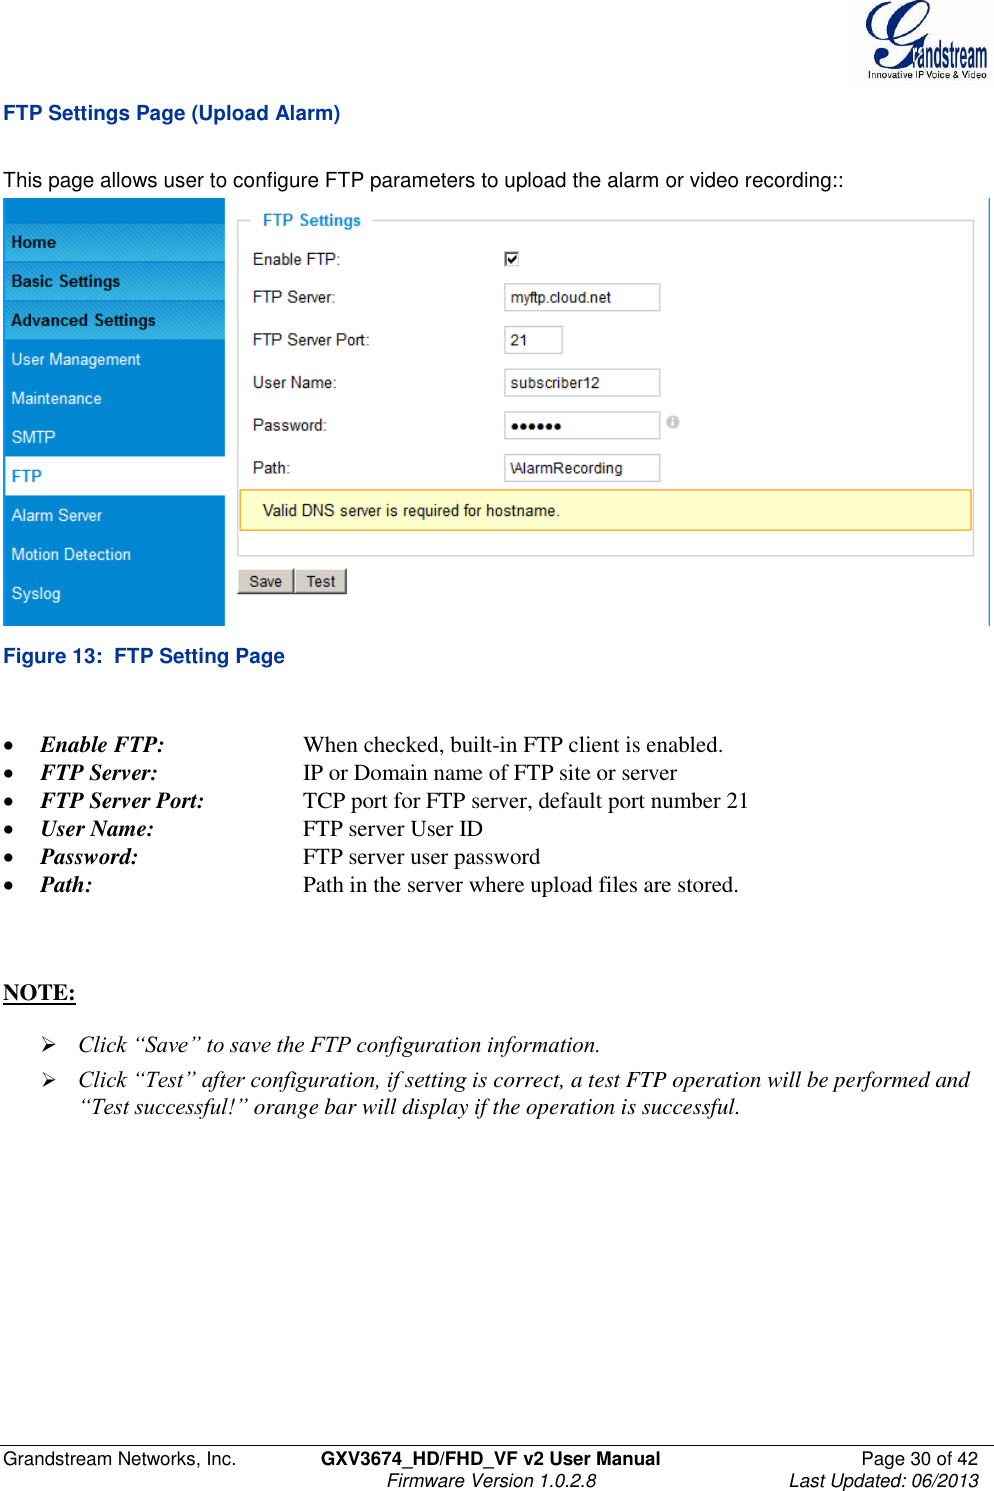  Grandstream Networks, Inc.  GXV3674_HD/FHD_VF v2 User Manual  Page 30 of 42   Firmware Version 1.0.2.8  Last Updated: 06/2013  FTP Settings Page (Upload Alarm)  This page allows user to configure FTP parameters to upload the alarm or video recording::  Figure 13:  FTP Setting Page   Enable FTP:    When checked, built-in FTP client is enabled.   FTP Server:    IP or Domain name of FTP site or server  FTP Server Port:    TCP port for FTP server, default port number 21  User Name:    FTP server User ID  Password:      FTP server user password  Path:      Path in the server where upload files are stored.     NOTE:    Click “Save” to save the FTP configuration information.  Click “Test” after configuration, if setting is correct, a test FTP operation will be performed and “Test successful!” orange bar will display if the operation is successful.  